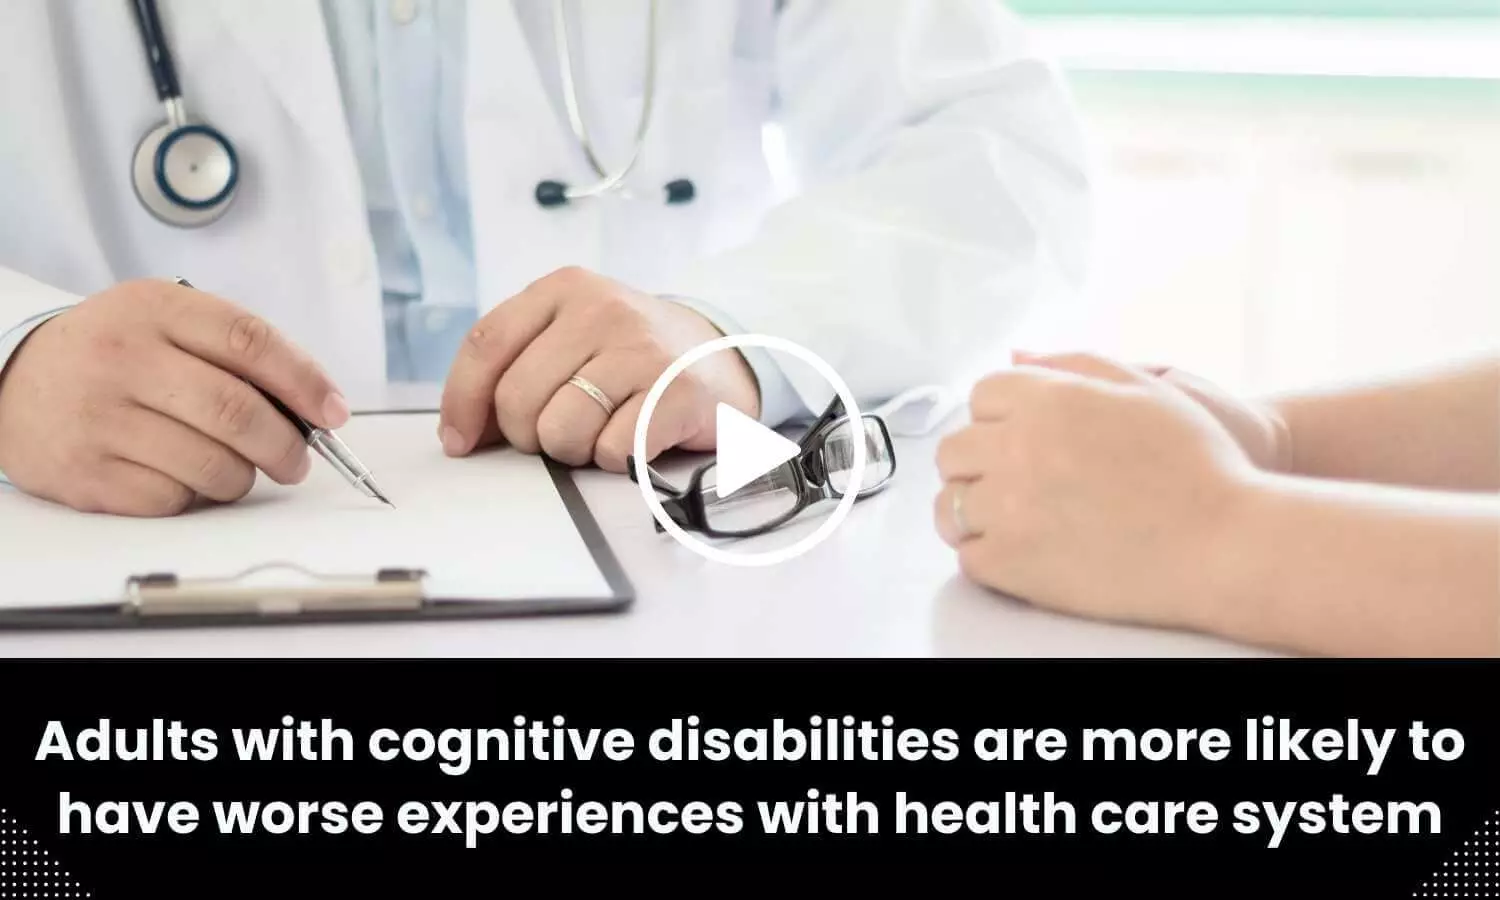 Adults with cognitive disabilities might have worse experiences with health care system